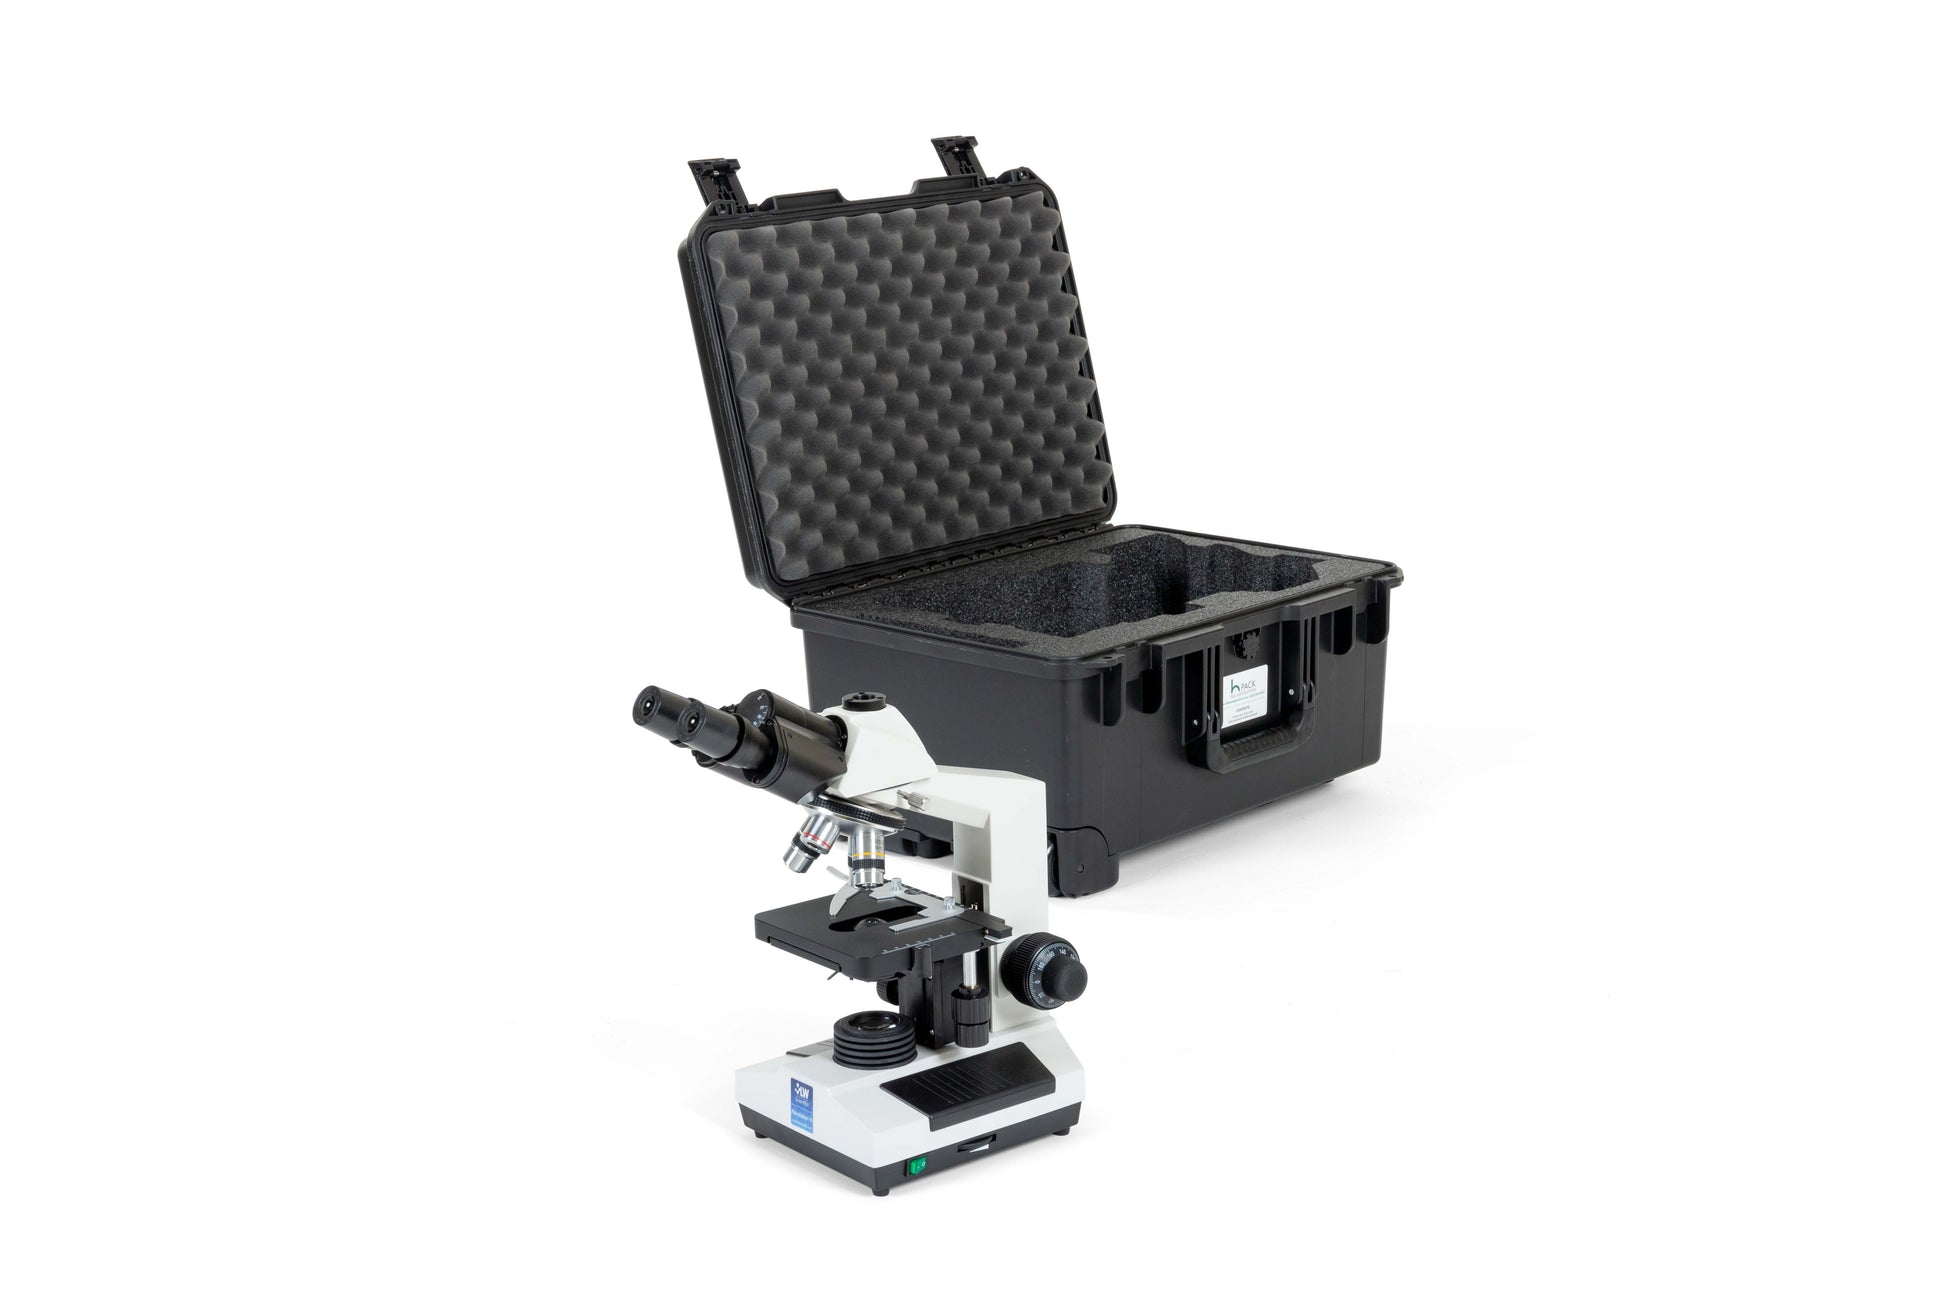 With the Microscope Case, you'll never have to compromise on the quality of your research due to a lack of a reliable, portable microscope. Enjoy the convenience of a secure and easily transportable microscope solution, empowering you to take your work wherever it leads. Elevate your research experience with the hPACK Microscope Case today!